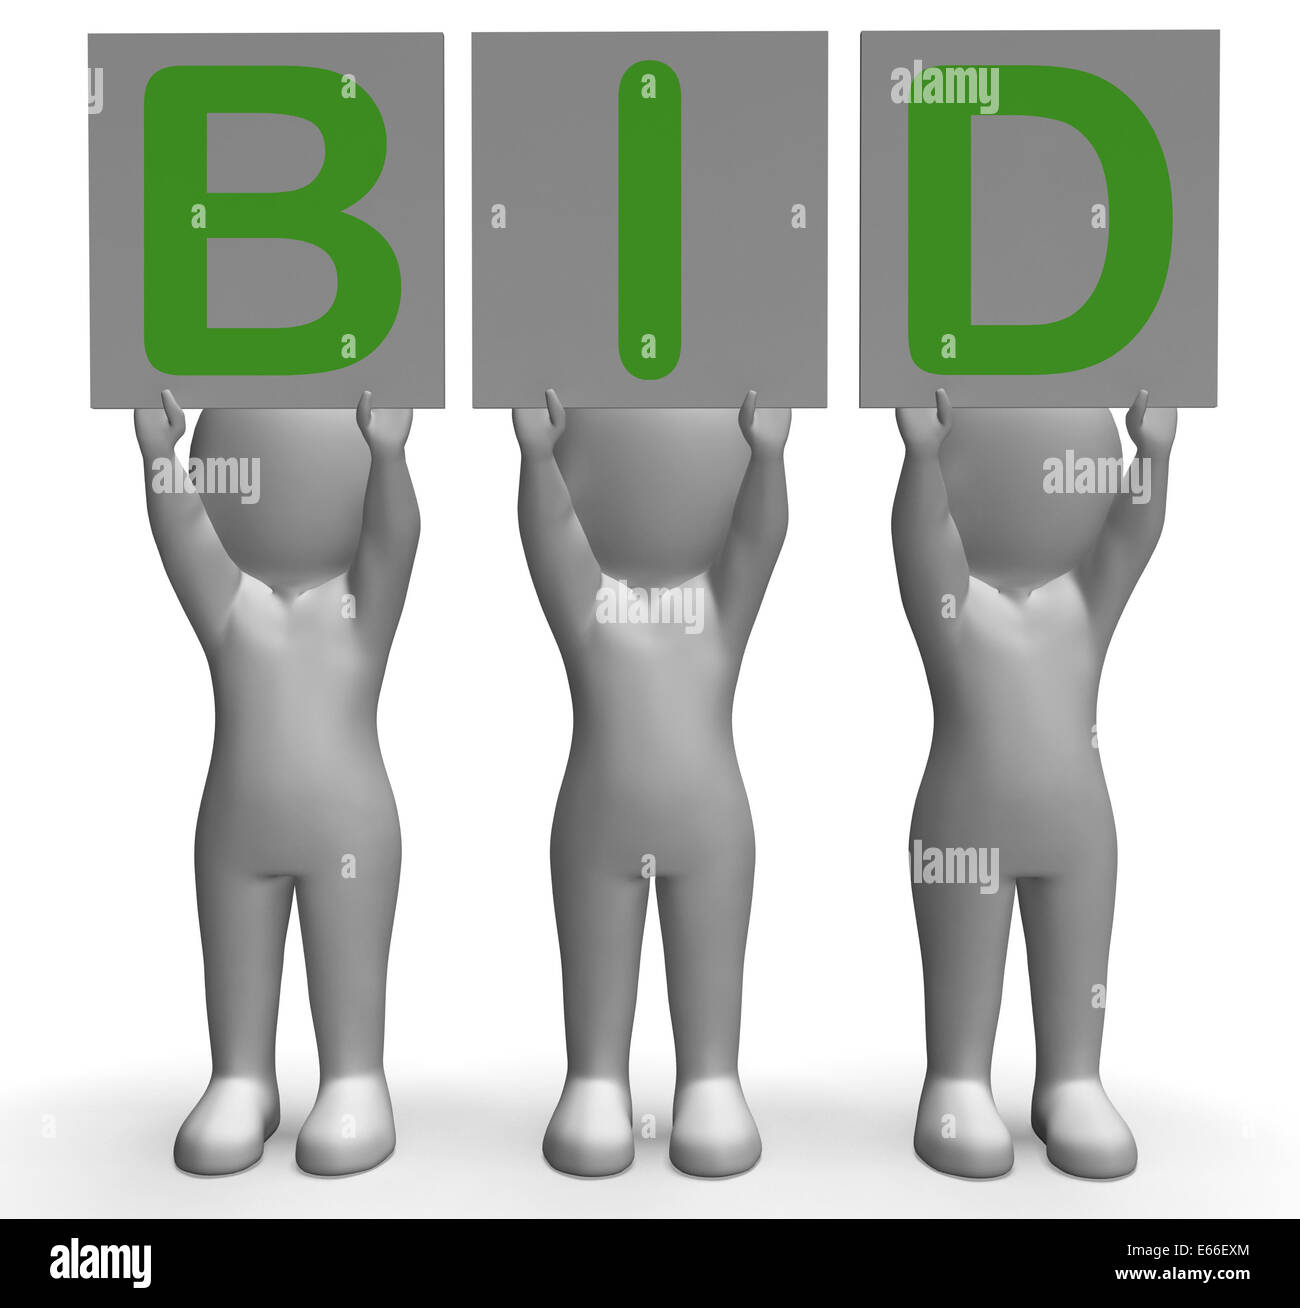 Bid Banners Showing Auction Bidder Seller And Auctioning Stock Photo